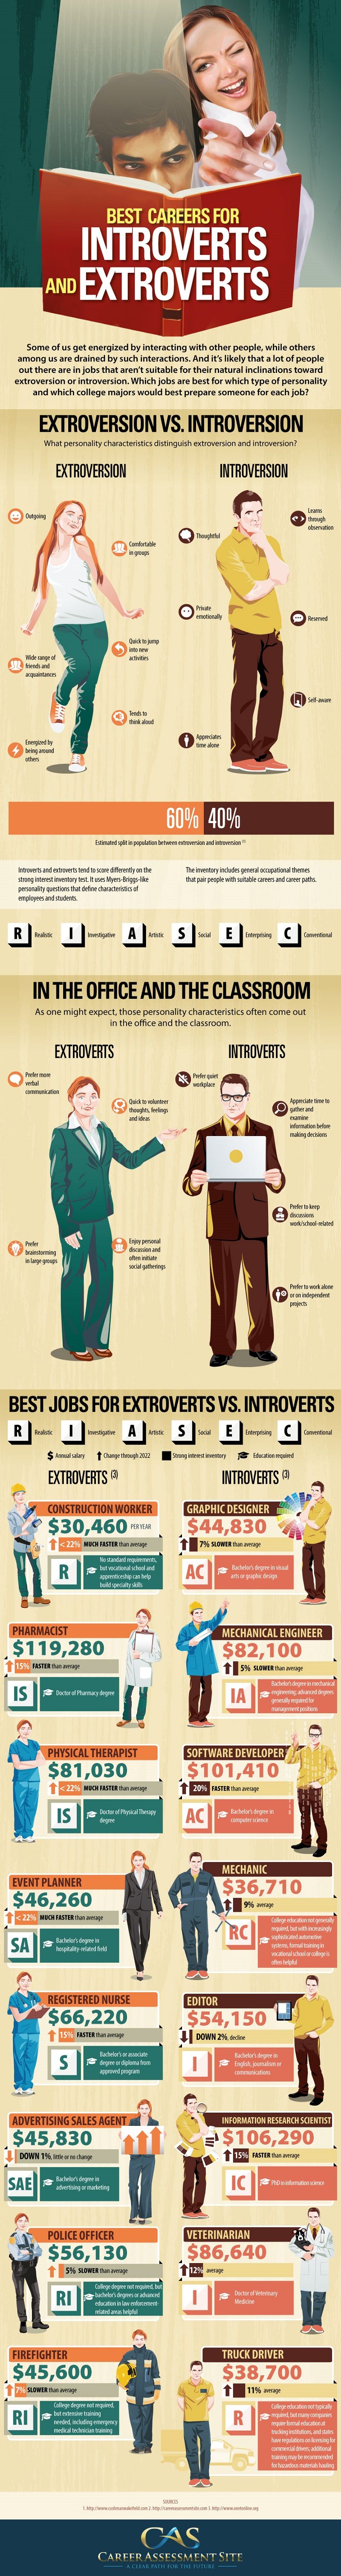 What Careers Best Suit Introverts and Extroverts?